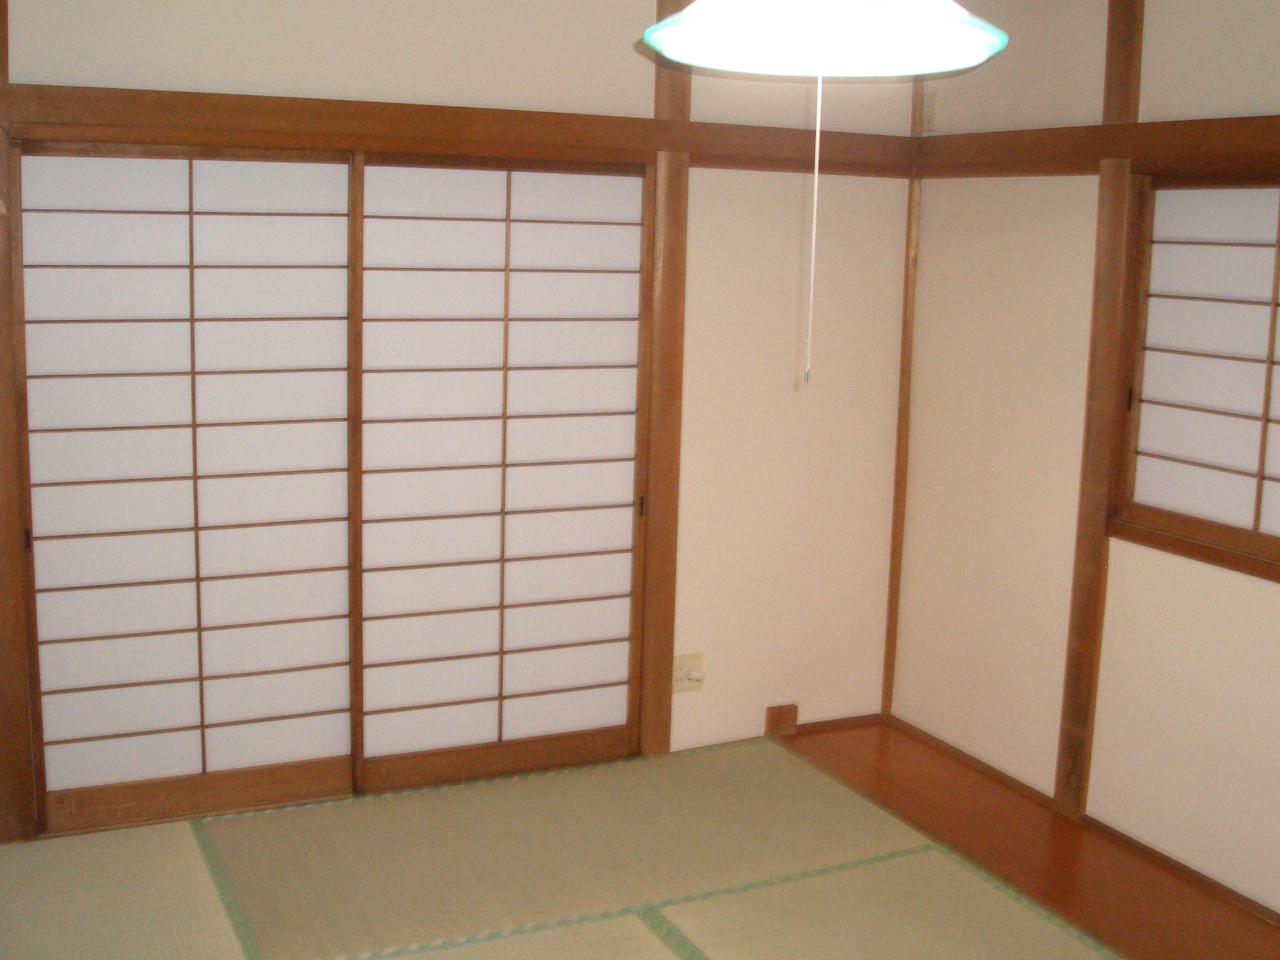 Living and room. Second floor Japanese-style room